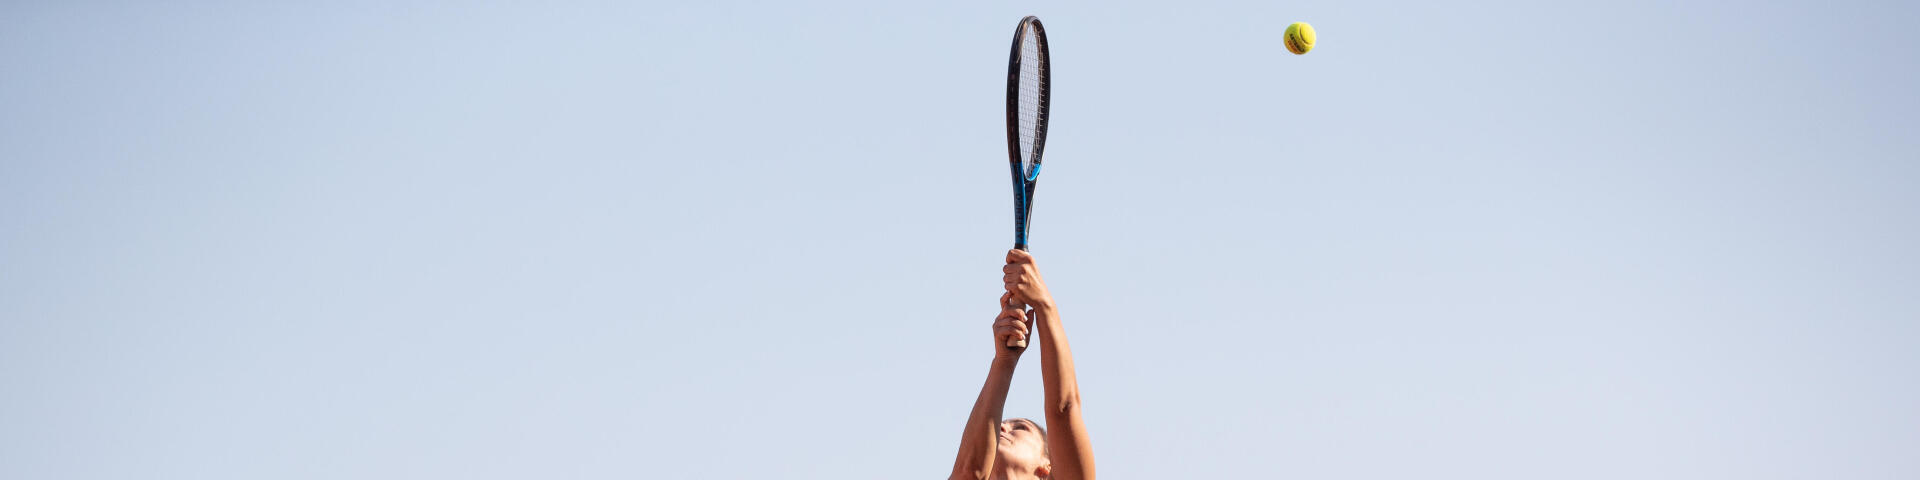 Tennis skills: how-to-hit-the-perfect-lob